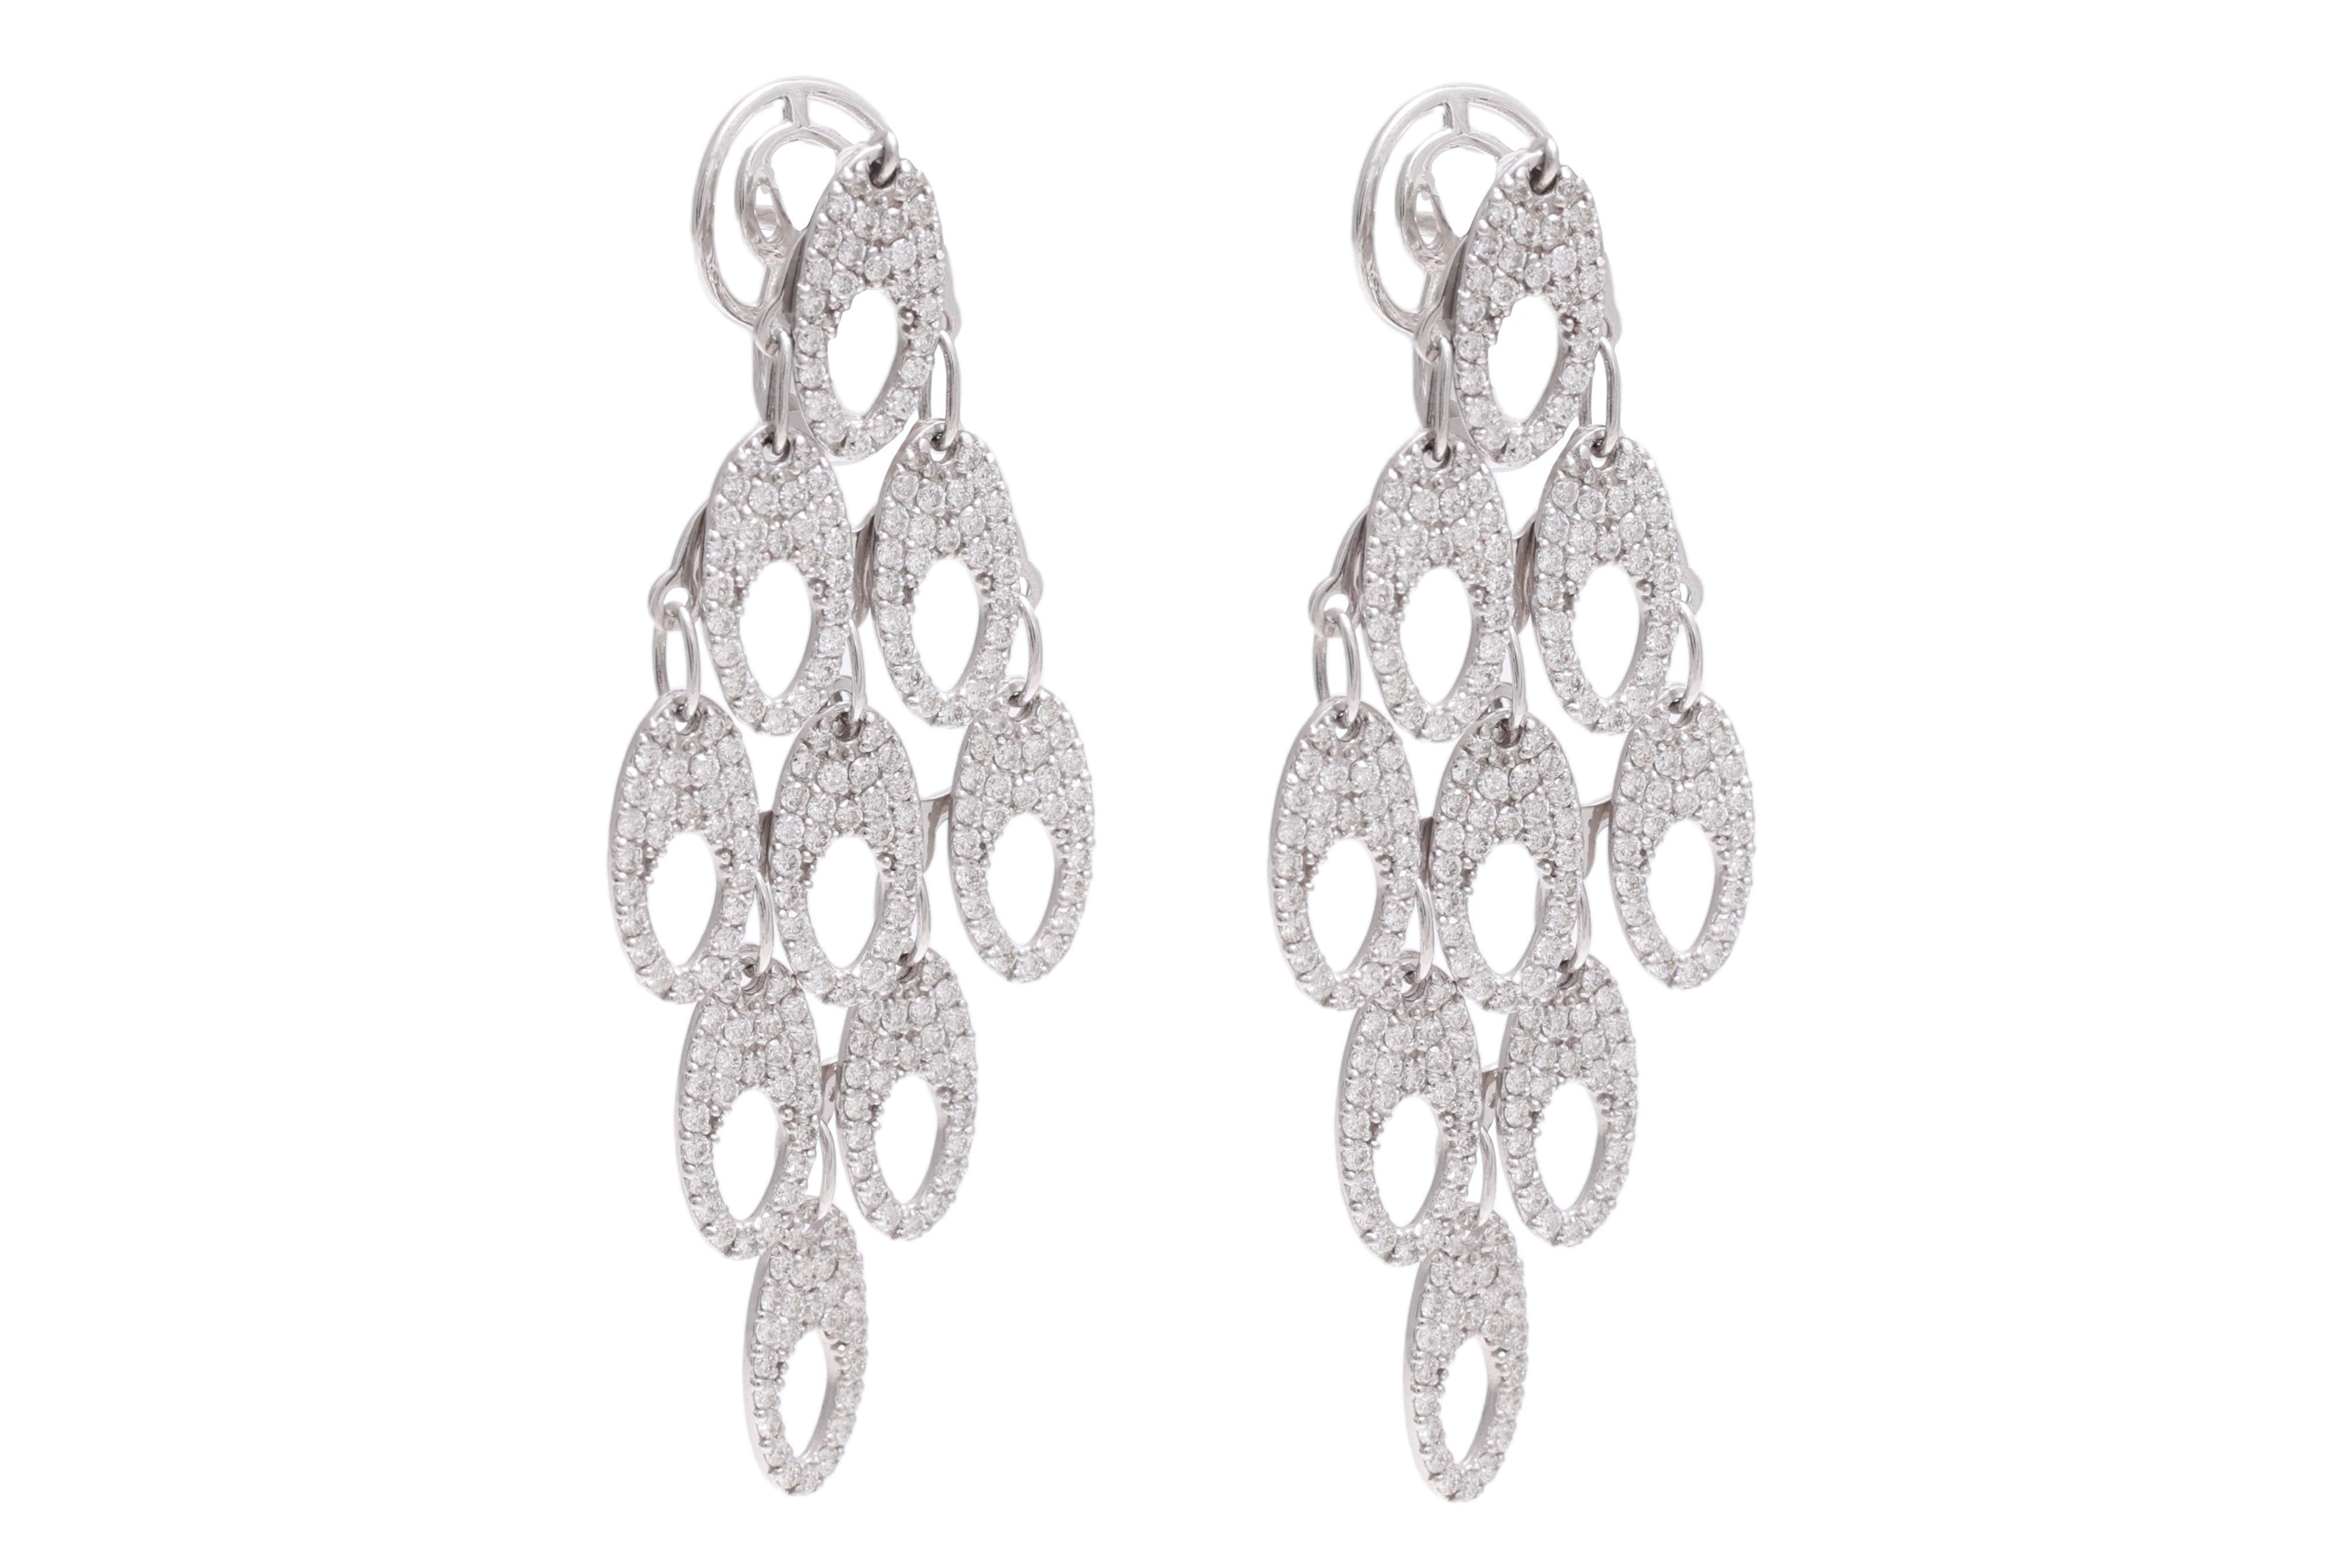 Magnificent Moving 18kt White Gold Chandelier Earrings With Diamonds

Diamonds: Brilliant cut diamonds together 3.77ct G vs

Material: 18kt white gold

Measurements: 58.5 mm x 22.5 mm x 11.2 mm

Total weight: 12.6 gram / 0.445 oz / 8.1 dwt